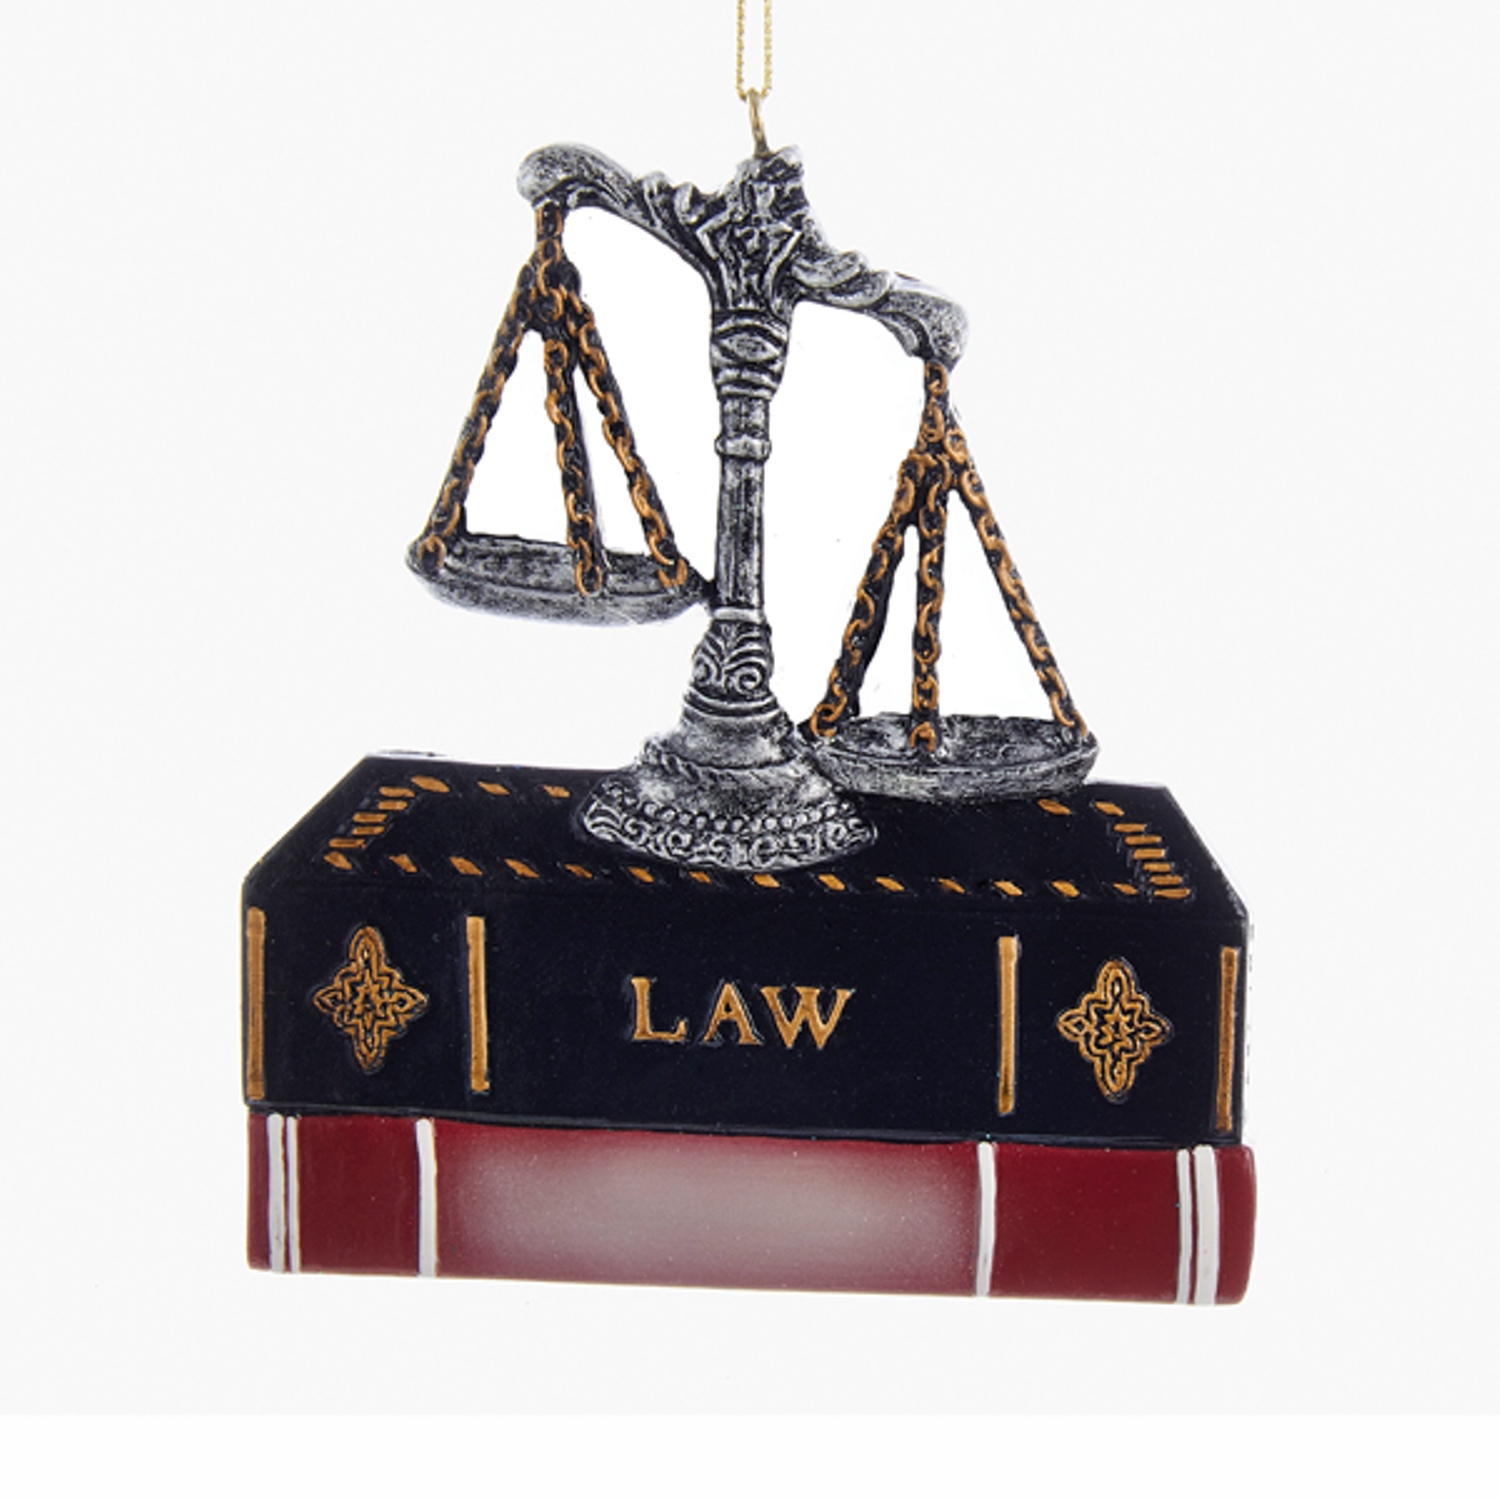 Kurt S. Adler Kurt Adler Lawyer Attorney Scales of Justice and Law Books Ornament